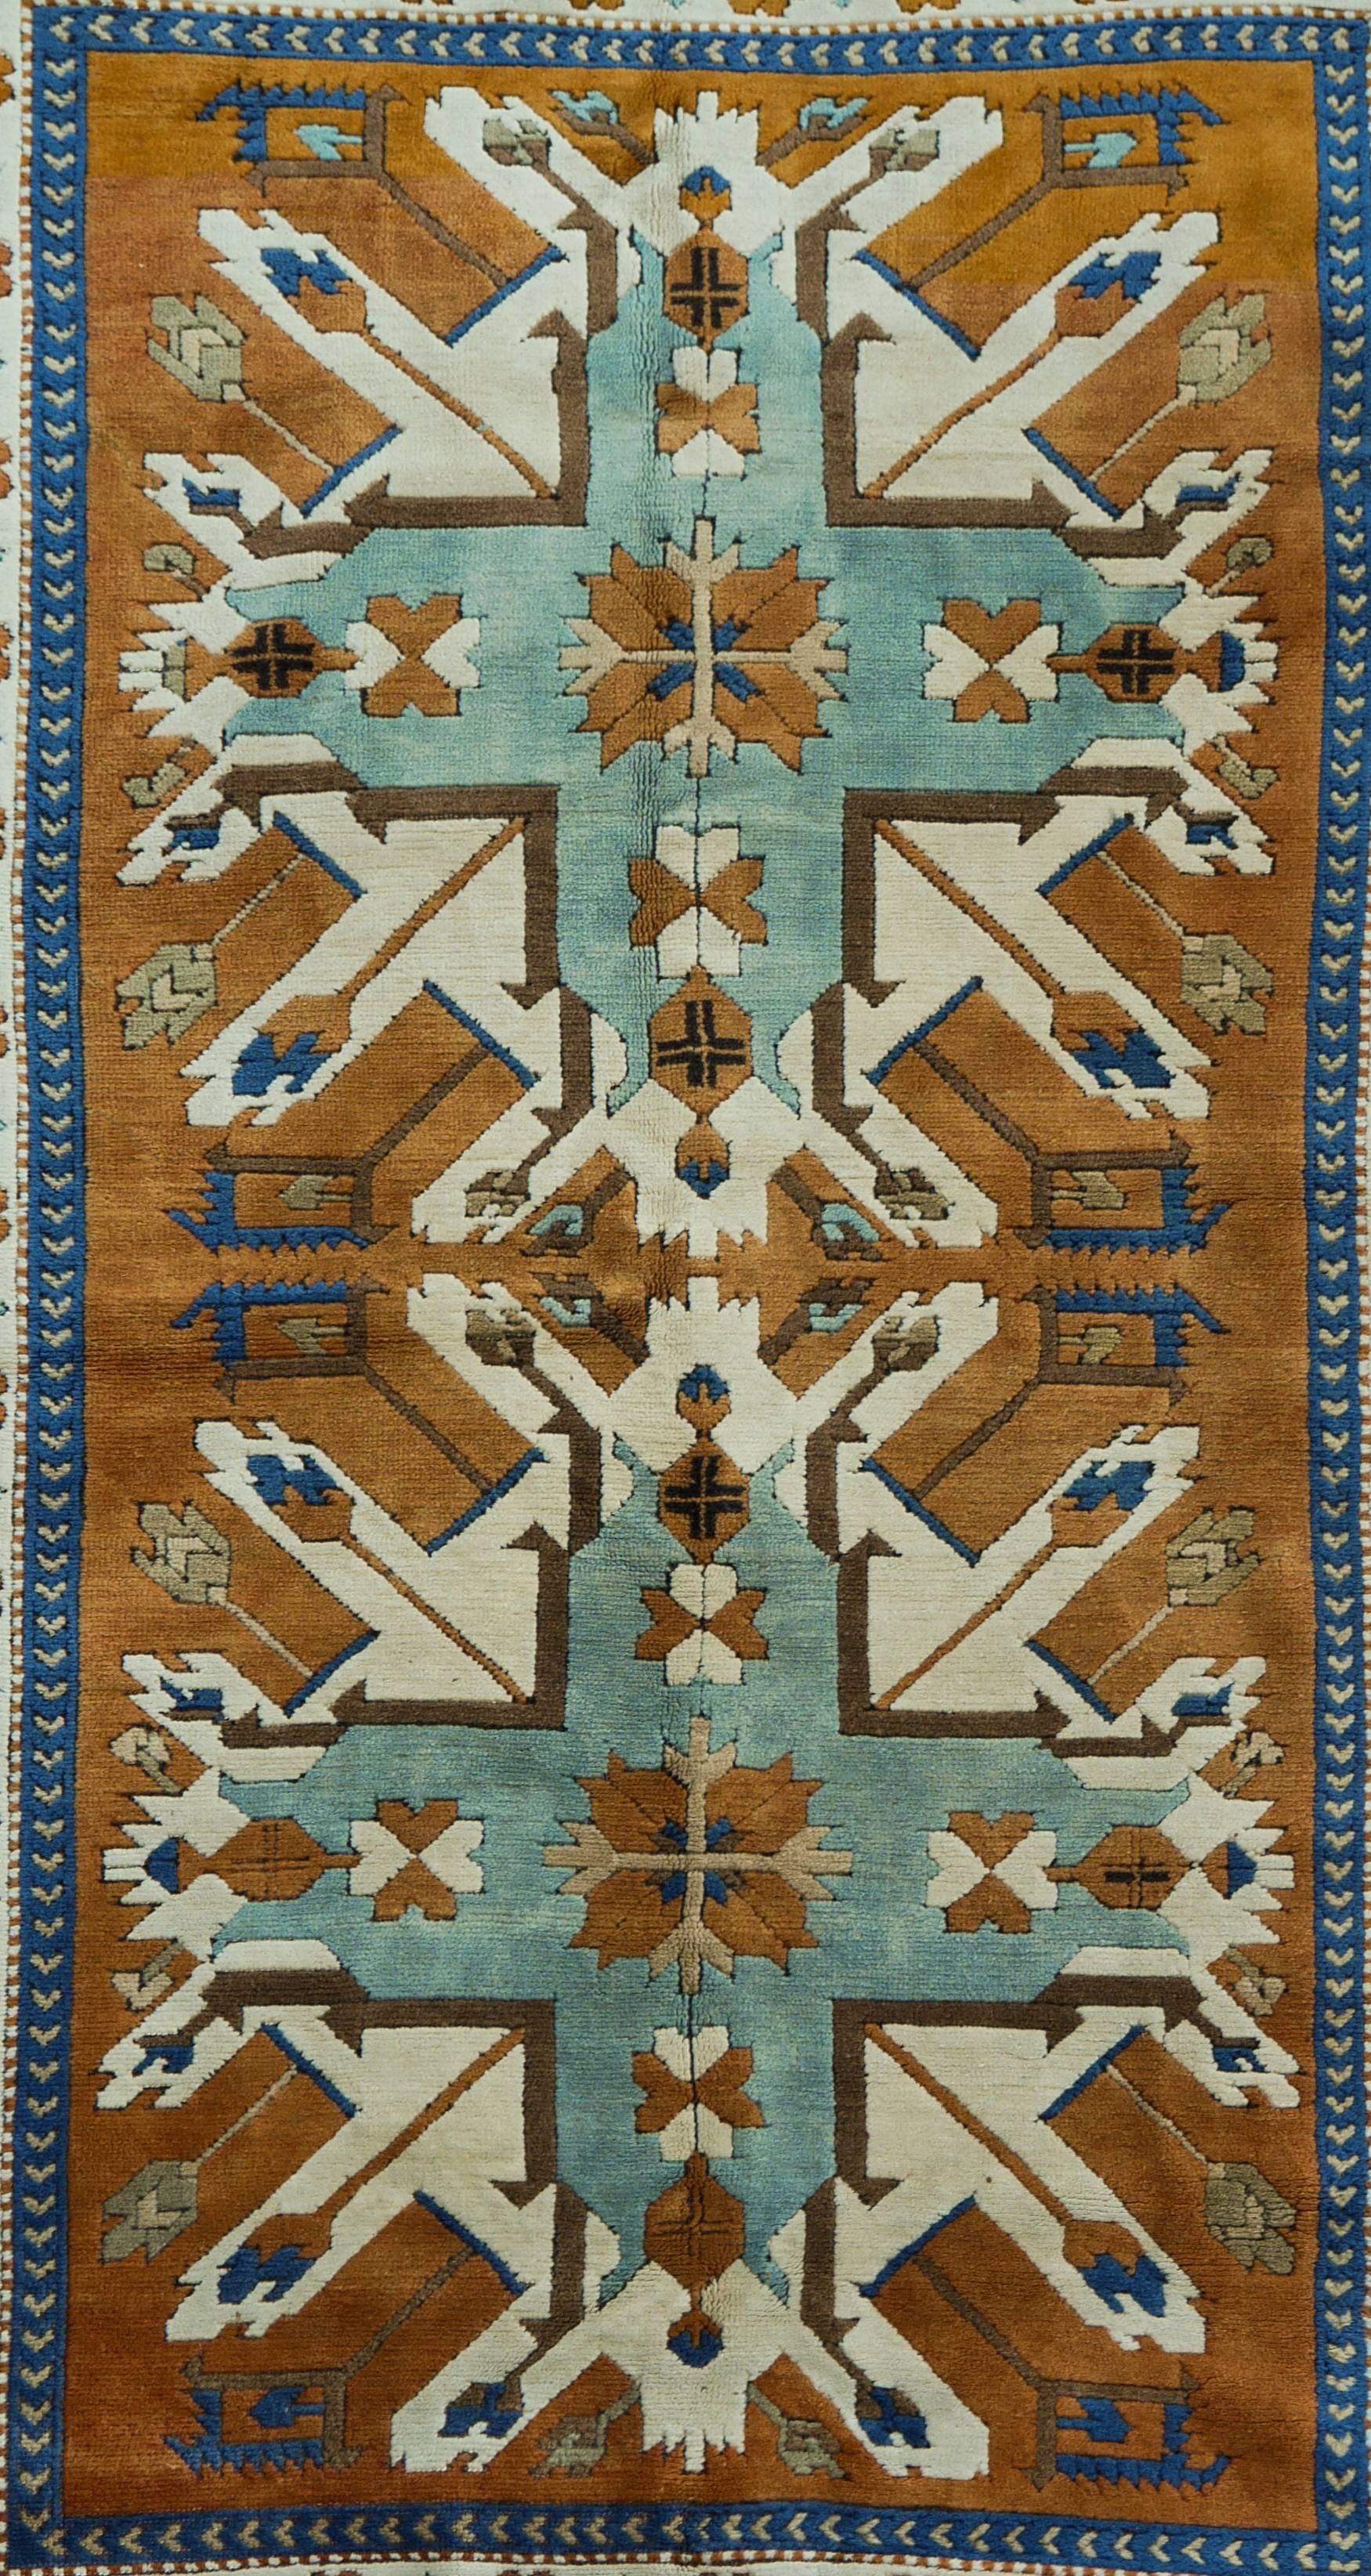 This is a Turkish caucasus ‘Eagle’ kazakh design rug. The eagle kazakhs are made in Karabagh region which borders with N.E. Iran and it is doubtless ‘the most sought-after collector’s item of the Caucasus,’ (-) P.R.J. Ford. This carpet however was